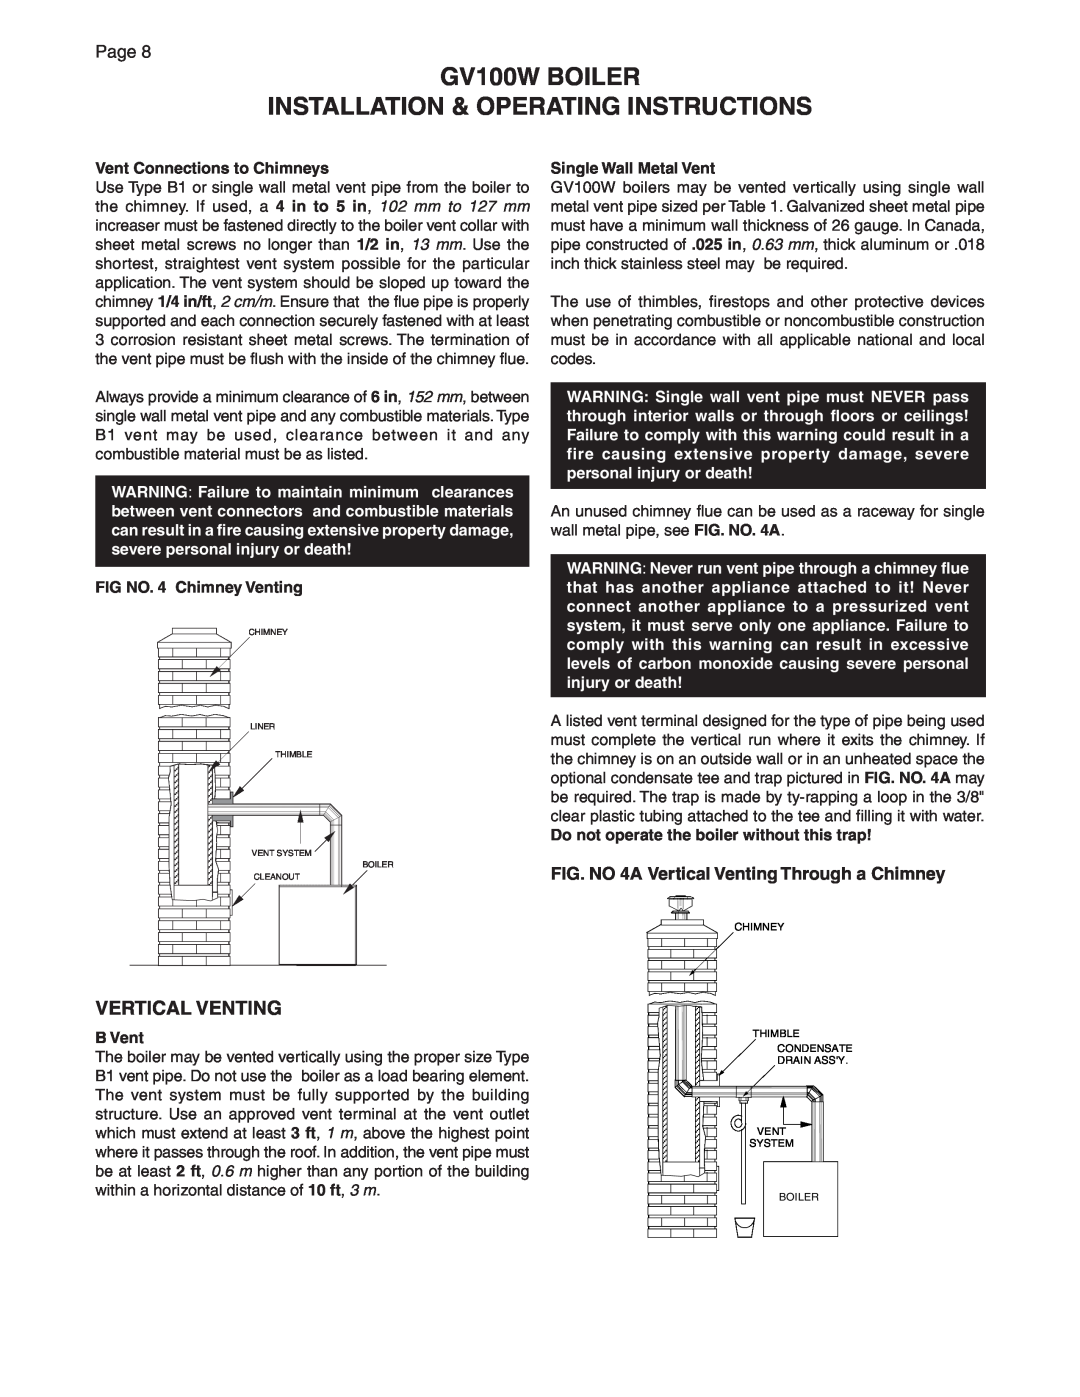 Smith Cast Iron Boilers GVIOM-5R manual GV100W BOILER, Installation & Operating Instructions, Vertical Venting 